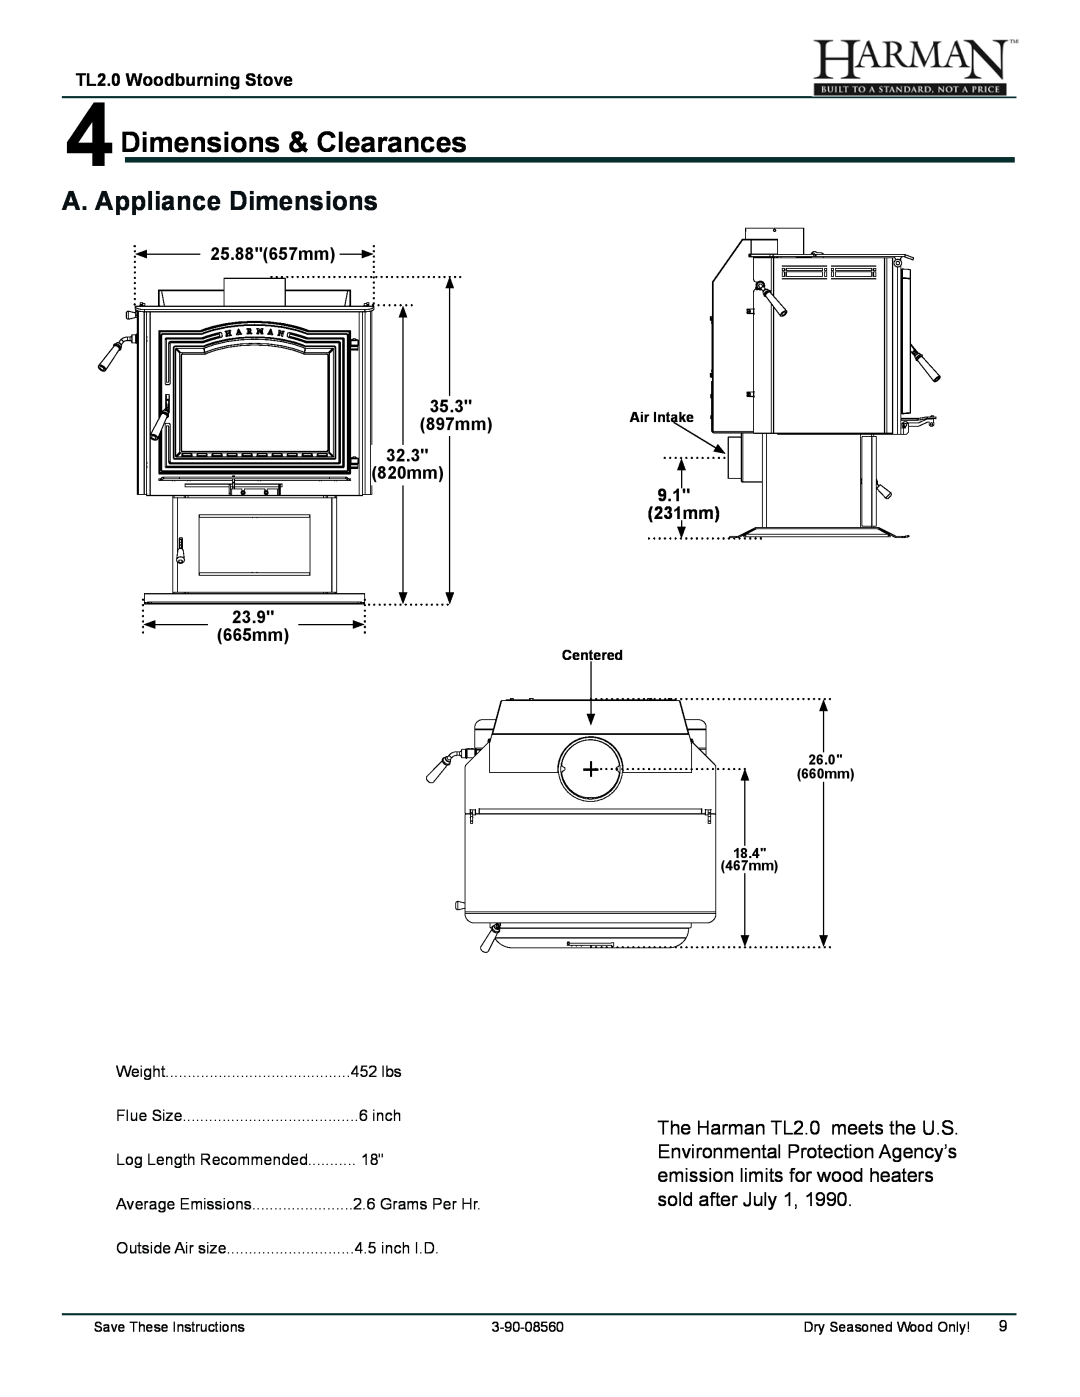 Harman Stove Company 4Dimensions & Clearances, A. Appliance Dimensions, TL2.0 Woodburning Stove, 25.88657mm, 35.3, 32.3 